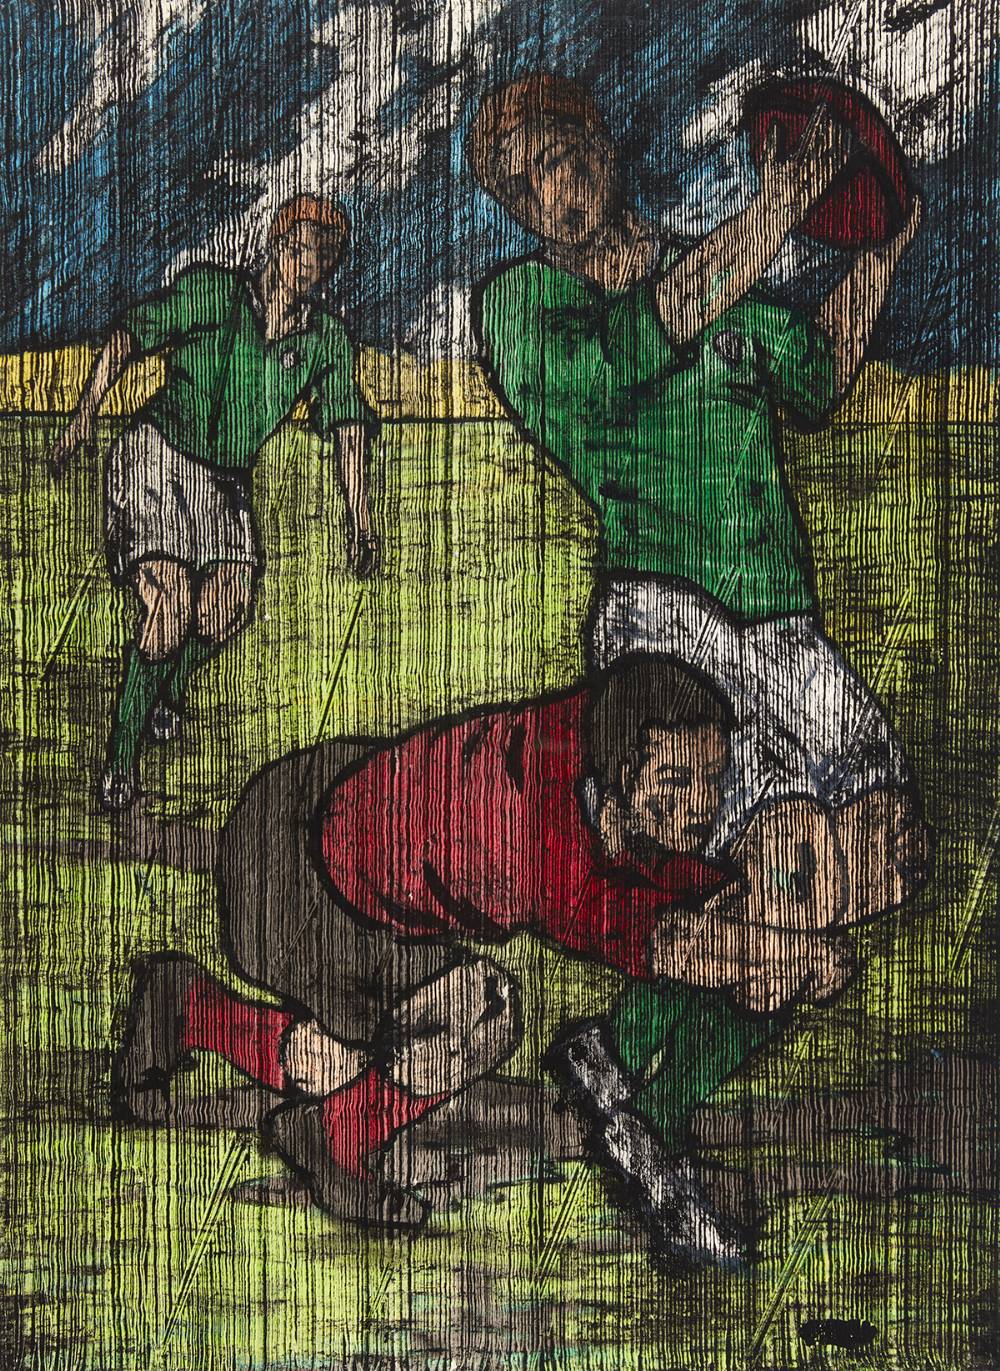 THE TACKLE by Valerie Enners  at Whyte's Auctions